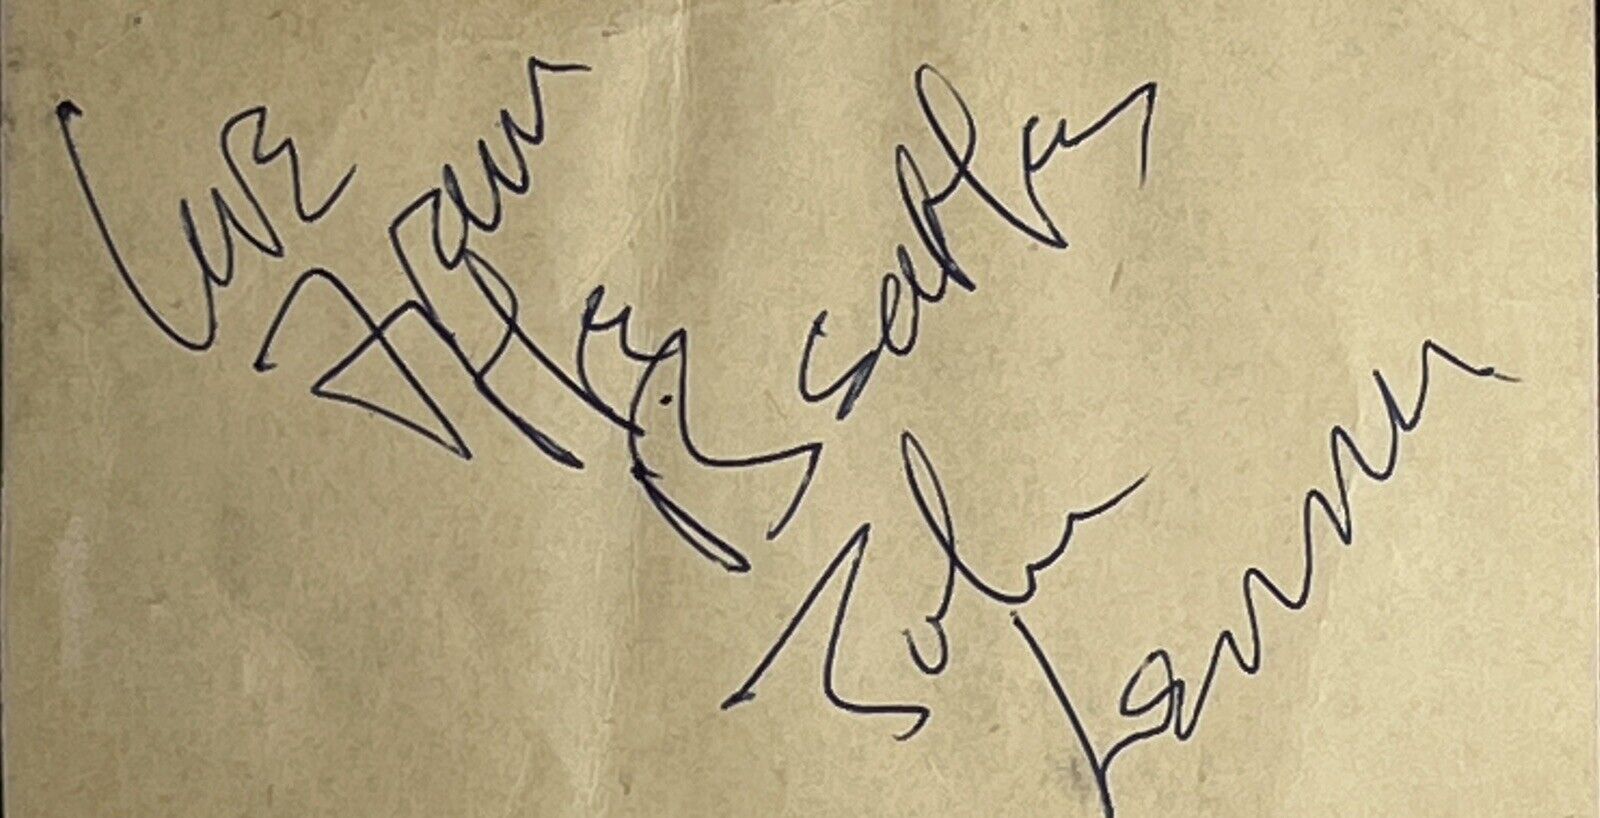 “ Love From The Beatles, John Lennon “ Autograph Signed August 21, 1966 St Louis